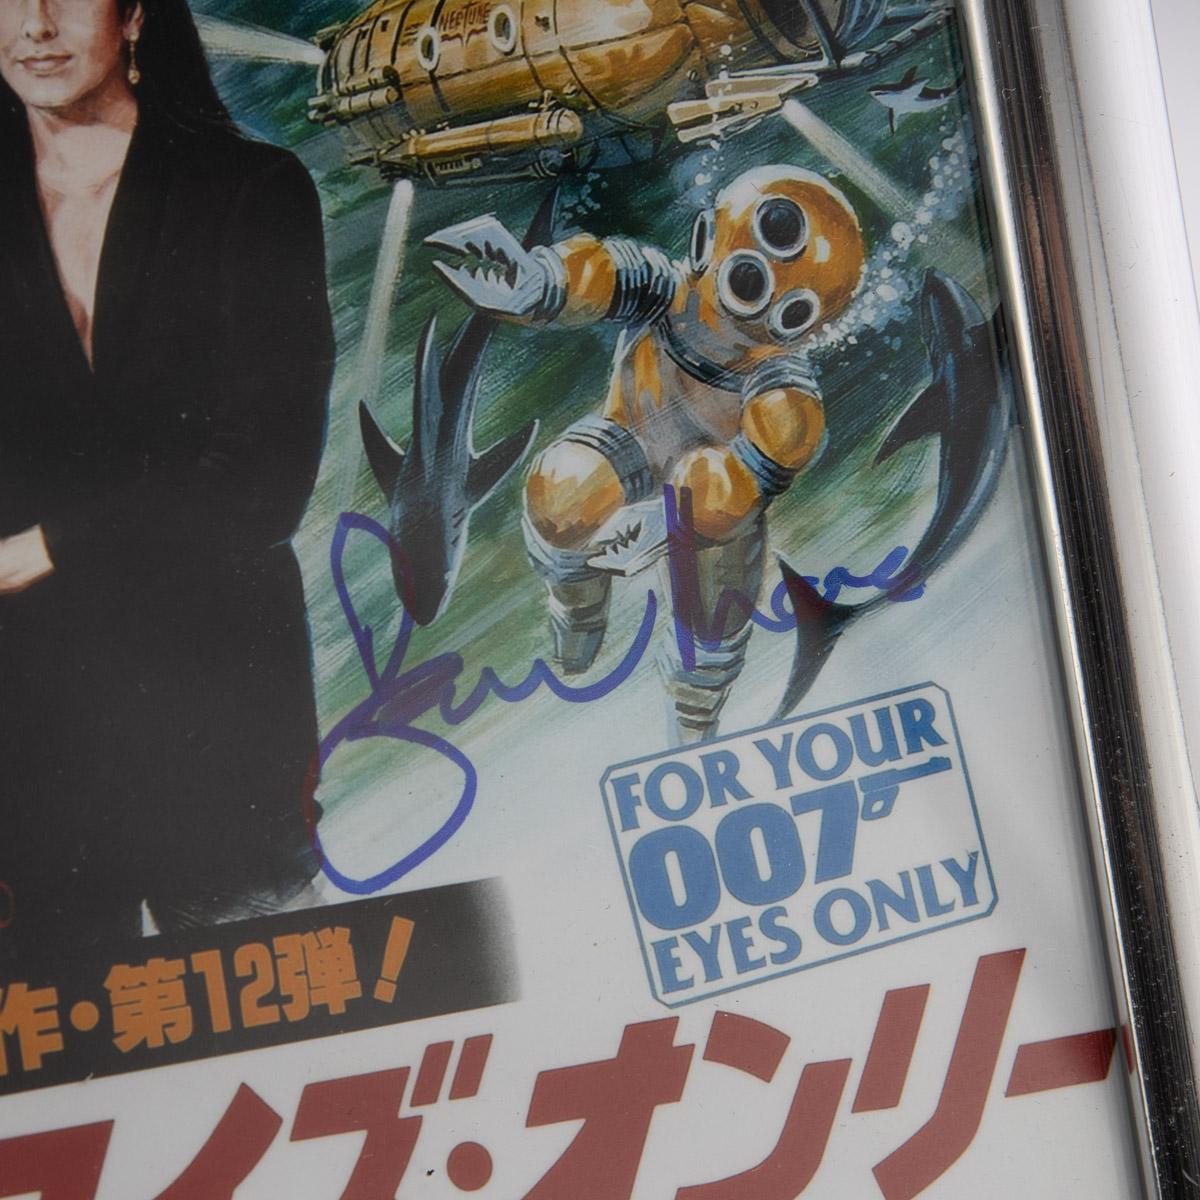 Original Japanese Signed By Roger Moore 'For Your Eyes Only' Mini Poster For Sale 2